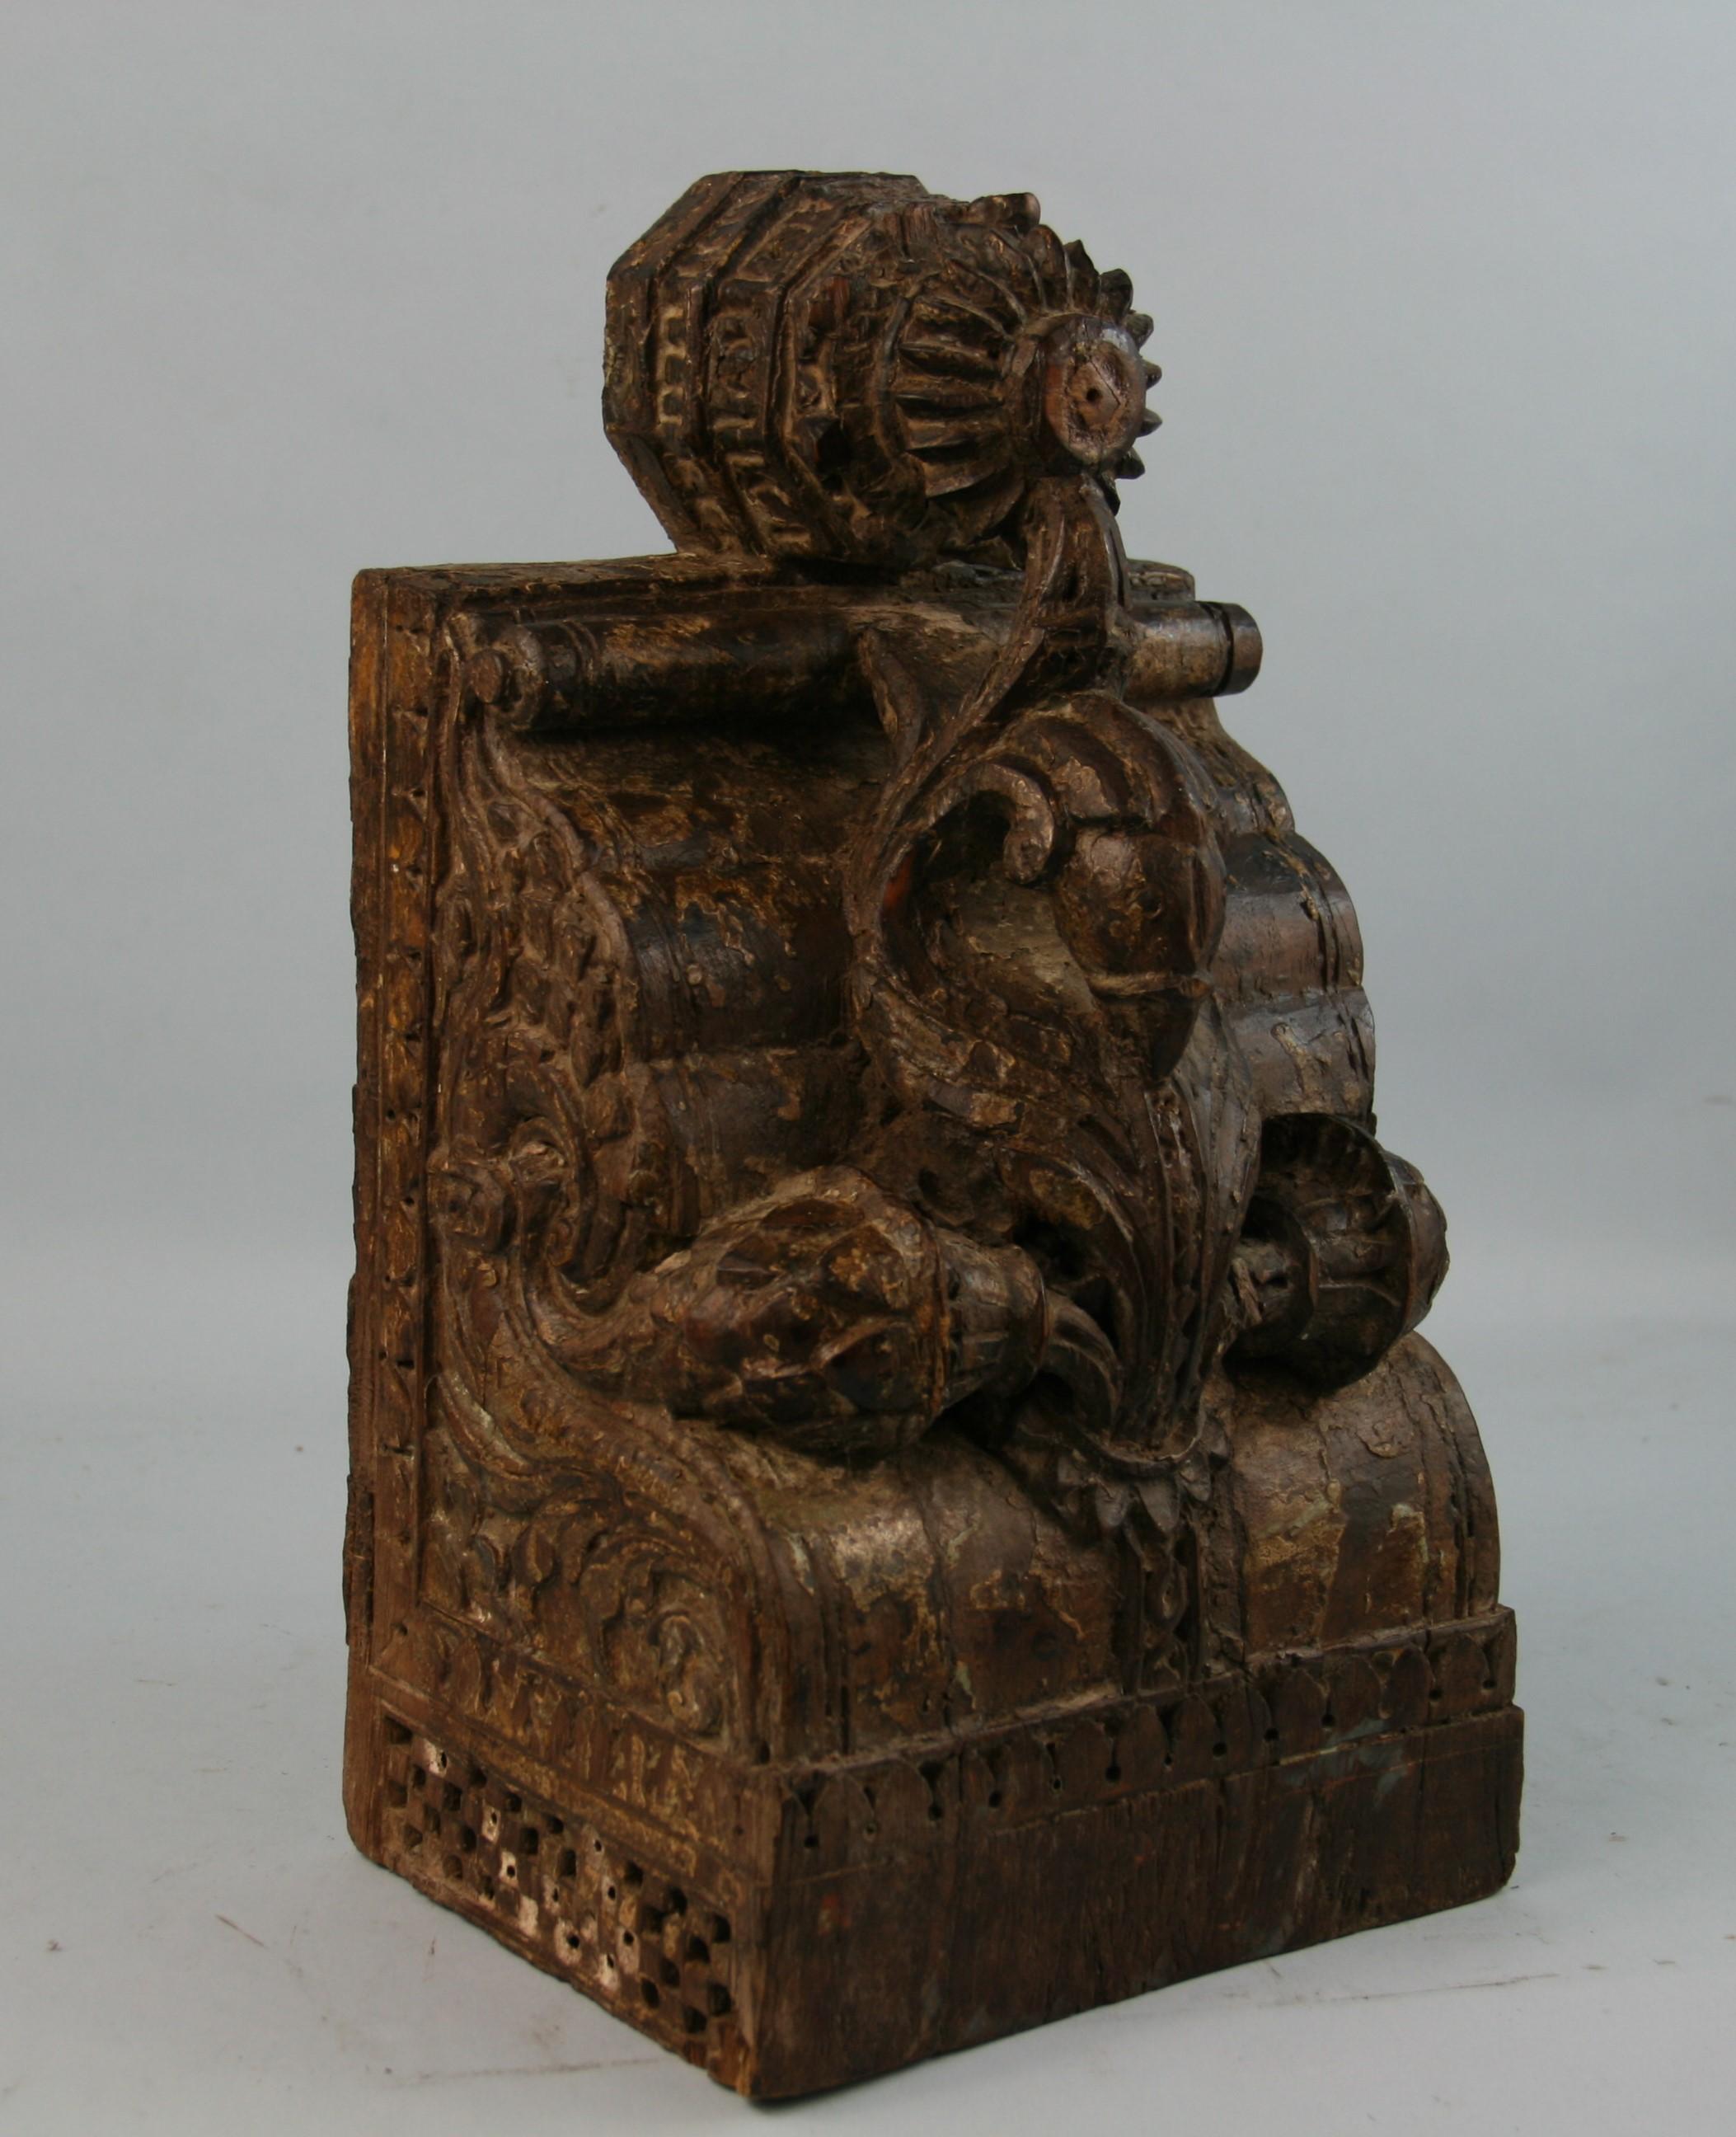 3-732 hand carved Indian architectural temple element with remnants of old paint
Similar item lighter wood see 3-731.